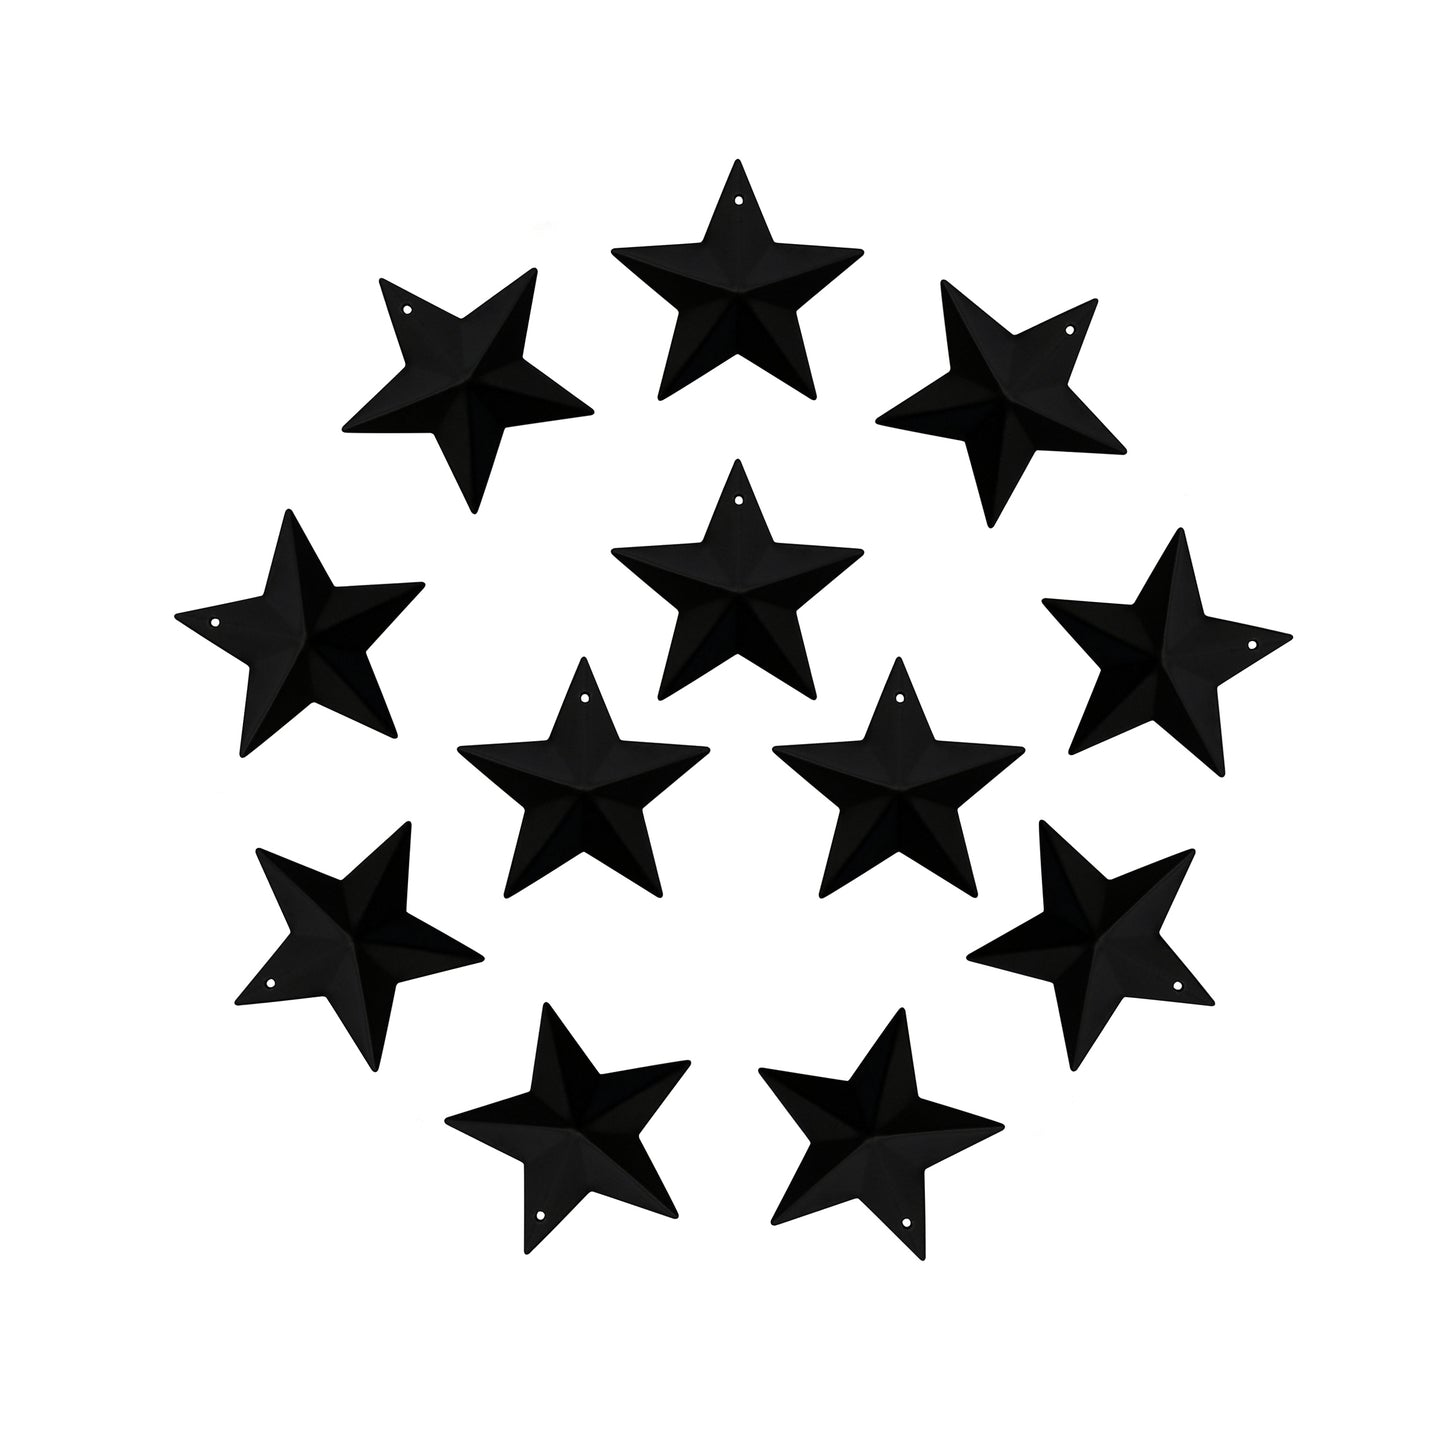 CVHOMEDECO. Country Rustic Primitive Vintage Gifts Black Small Metal Barn Star Wall/Door Decor, 2.25 Inch, Set of 12.